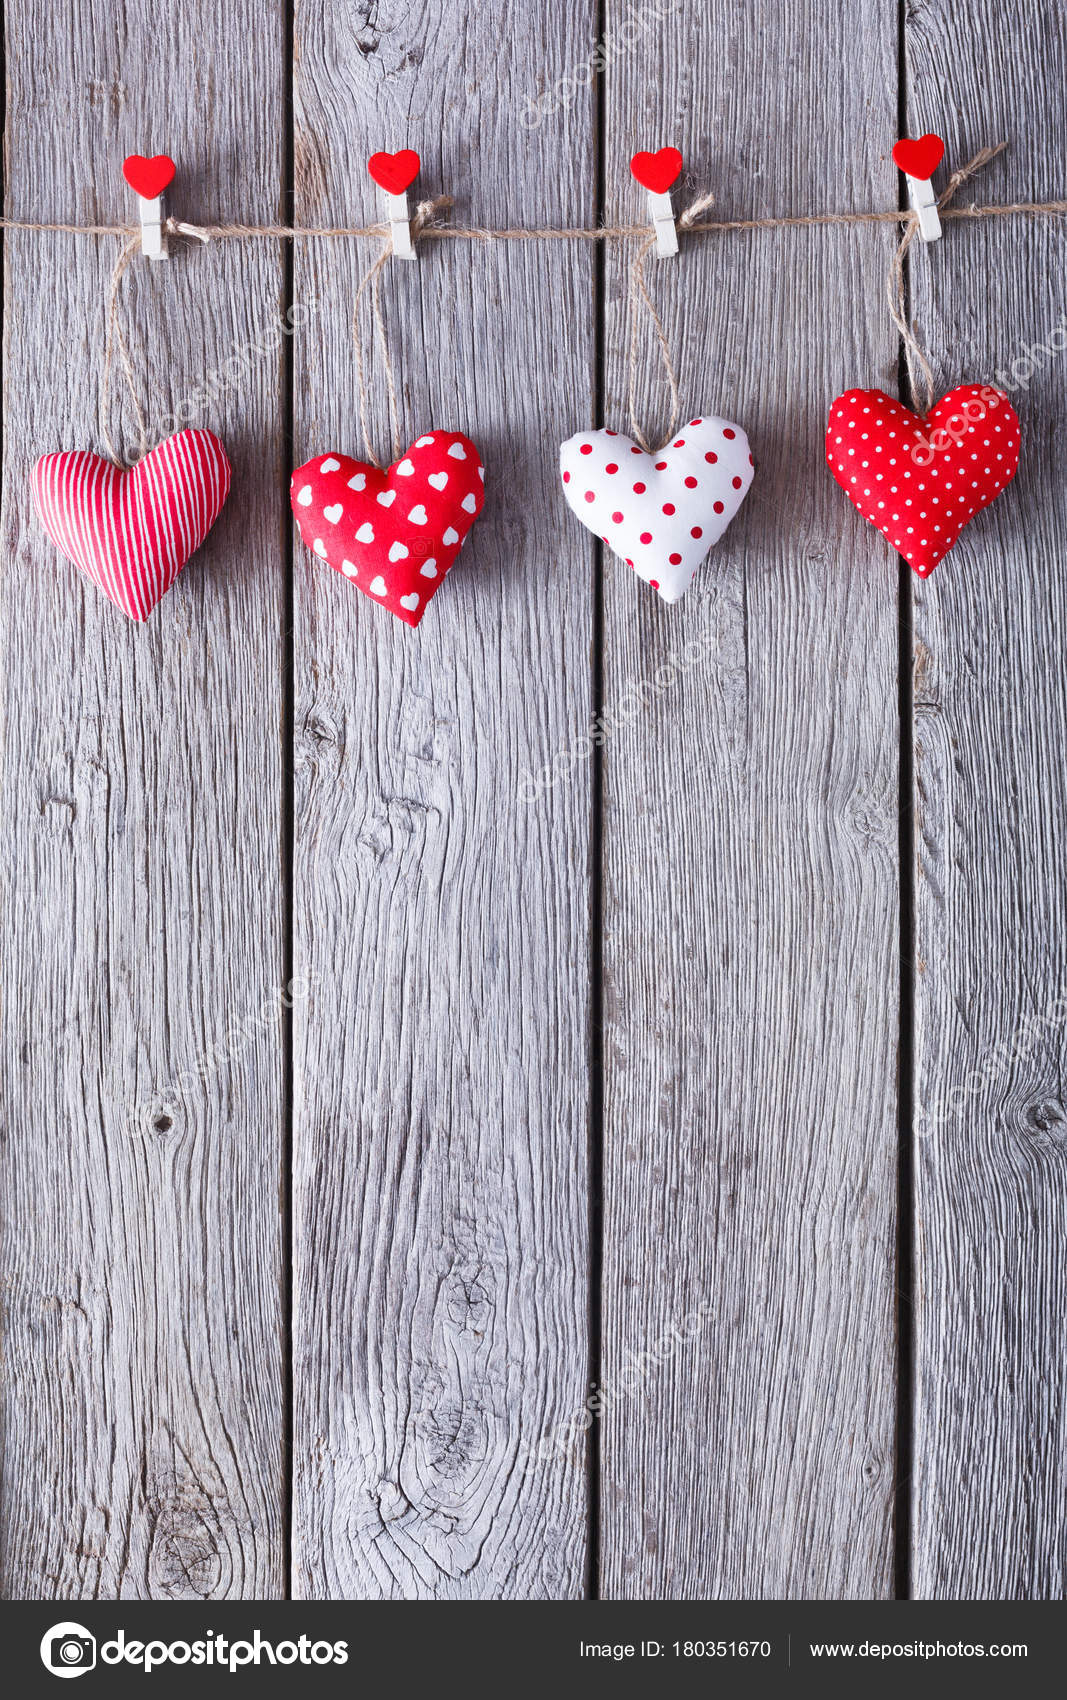 Valentine Day Background Pillow Hearts Border On Wood Stock Photo Image By C Milkos 180351670